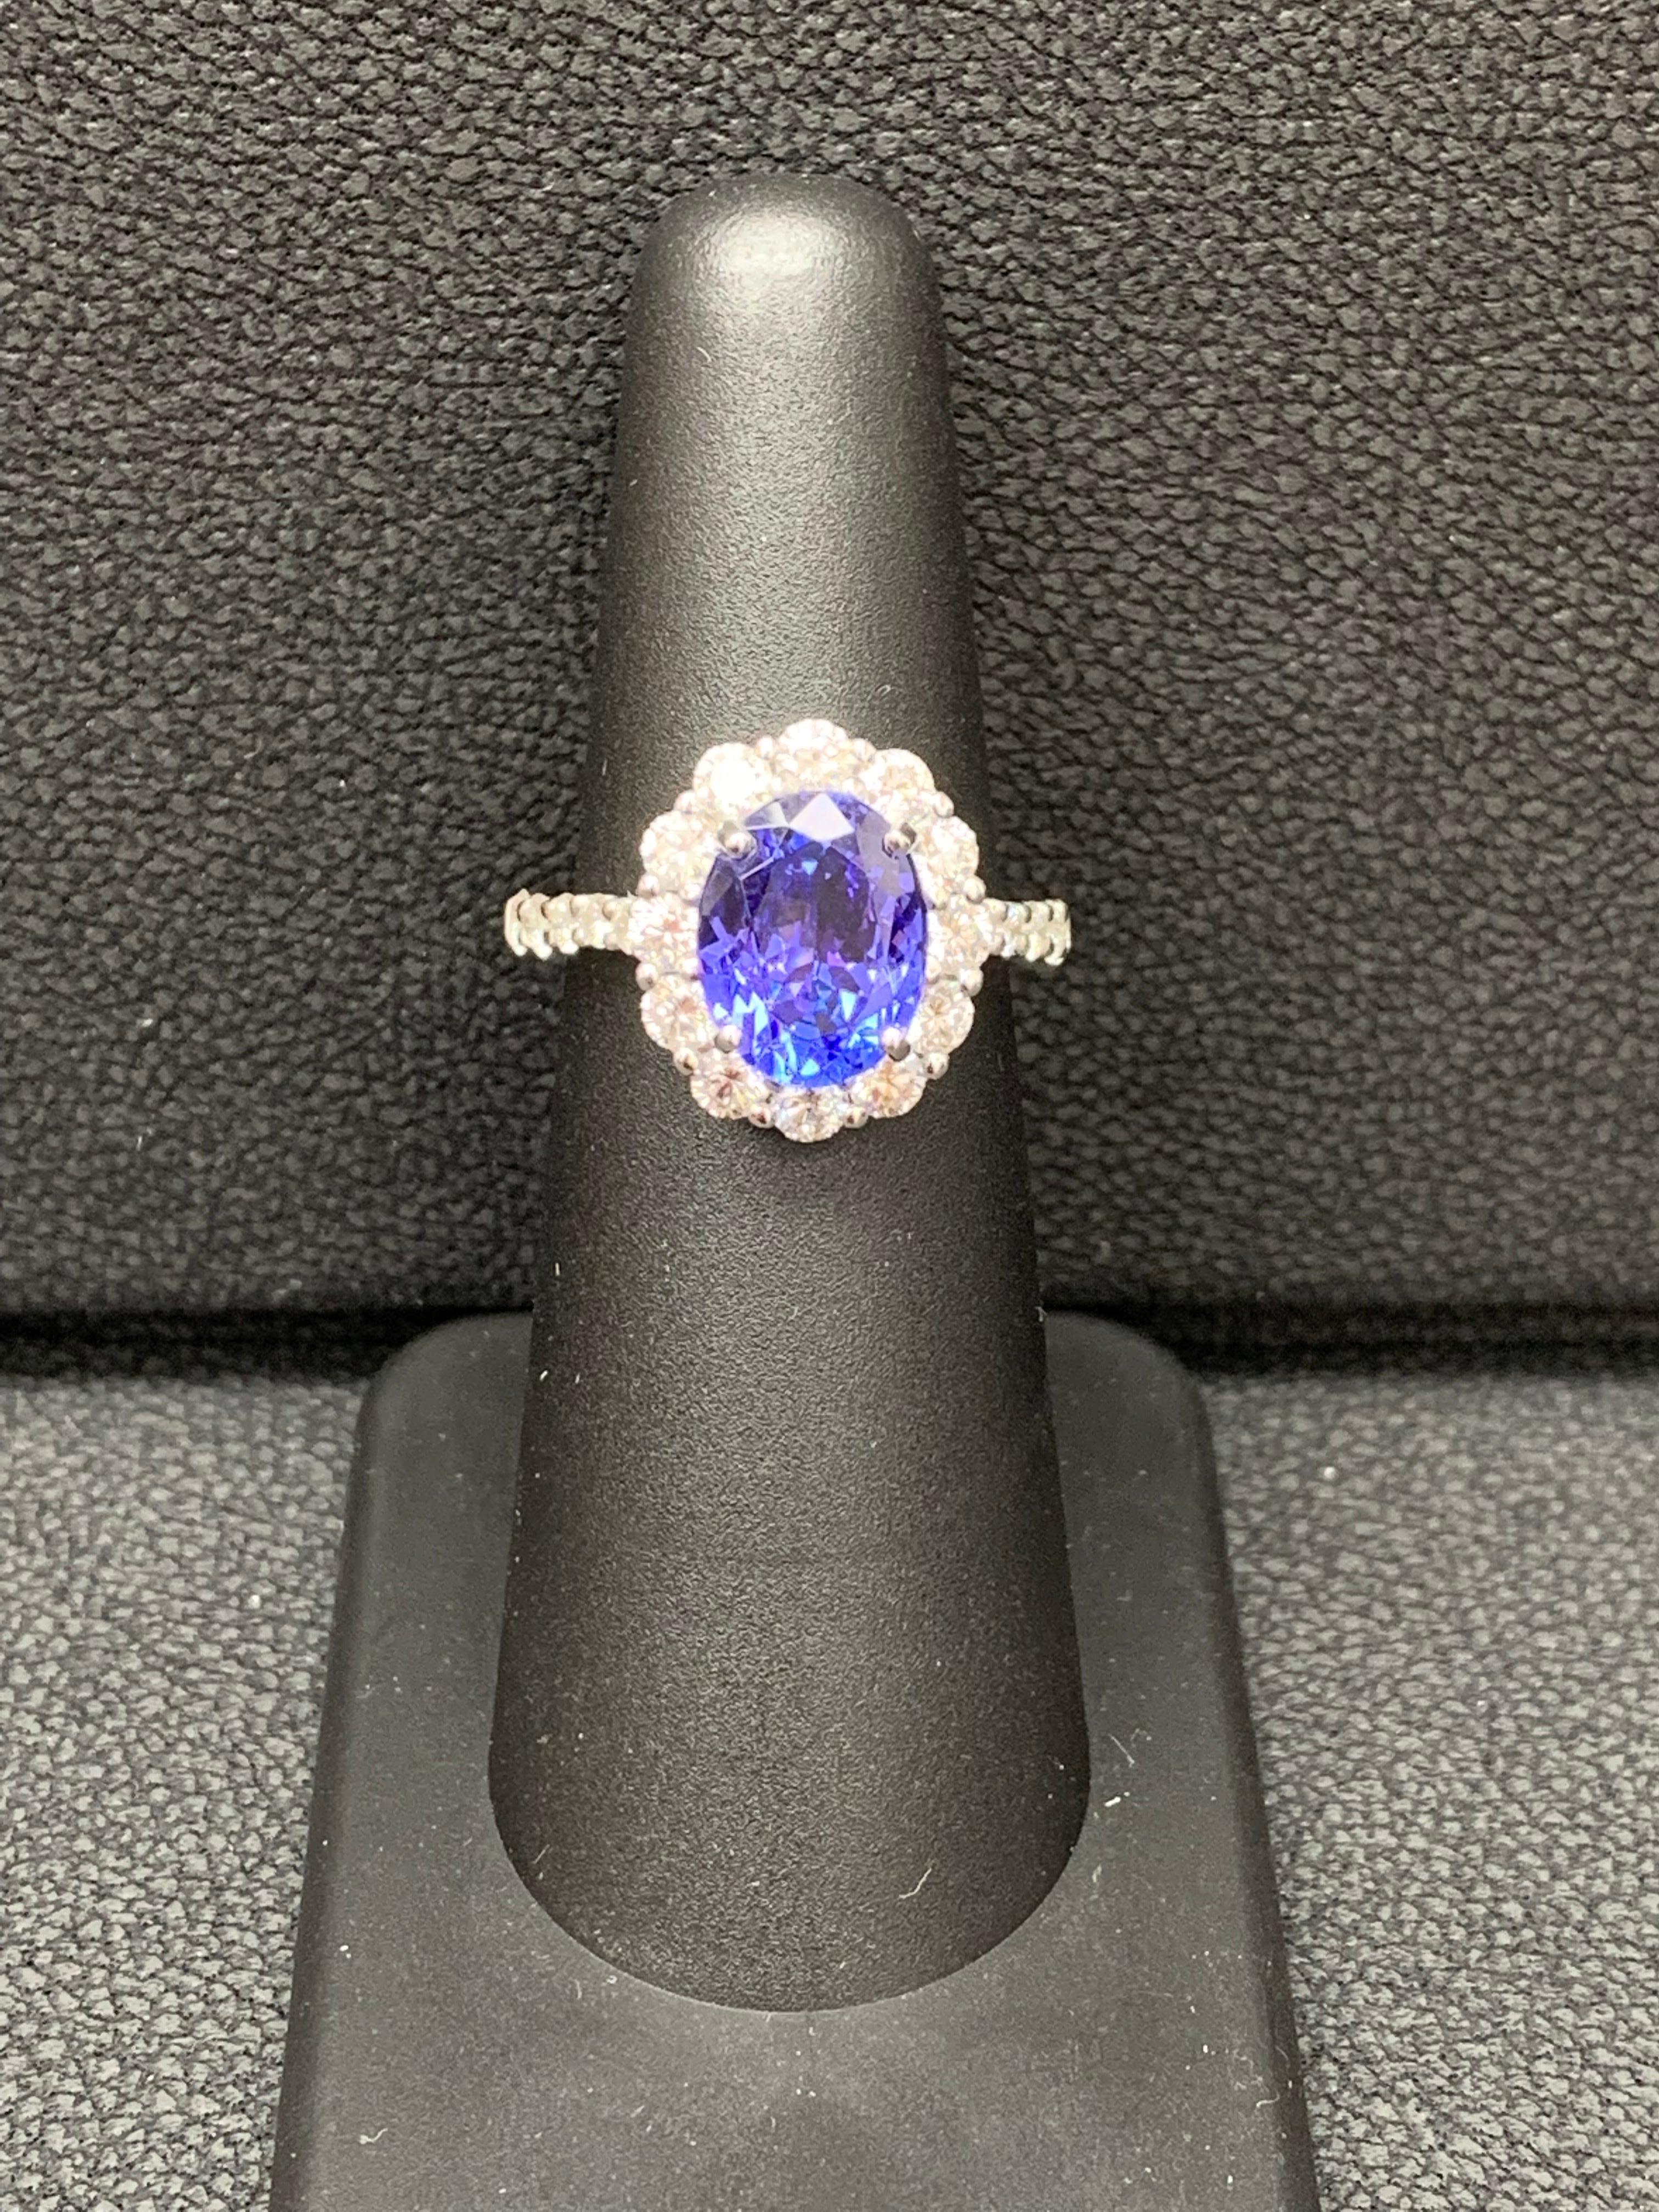 A simple floral motif ring showcasing a vibrant 2.45-carat oval cut tanzanite, surrounded by 
1.20 carats of 22 accent round diamonds. Made in 18 karats white gold.

Style available in different price ranges. Prices are based on your selection of